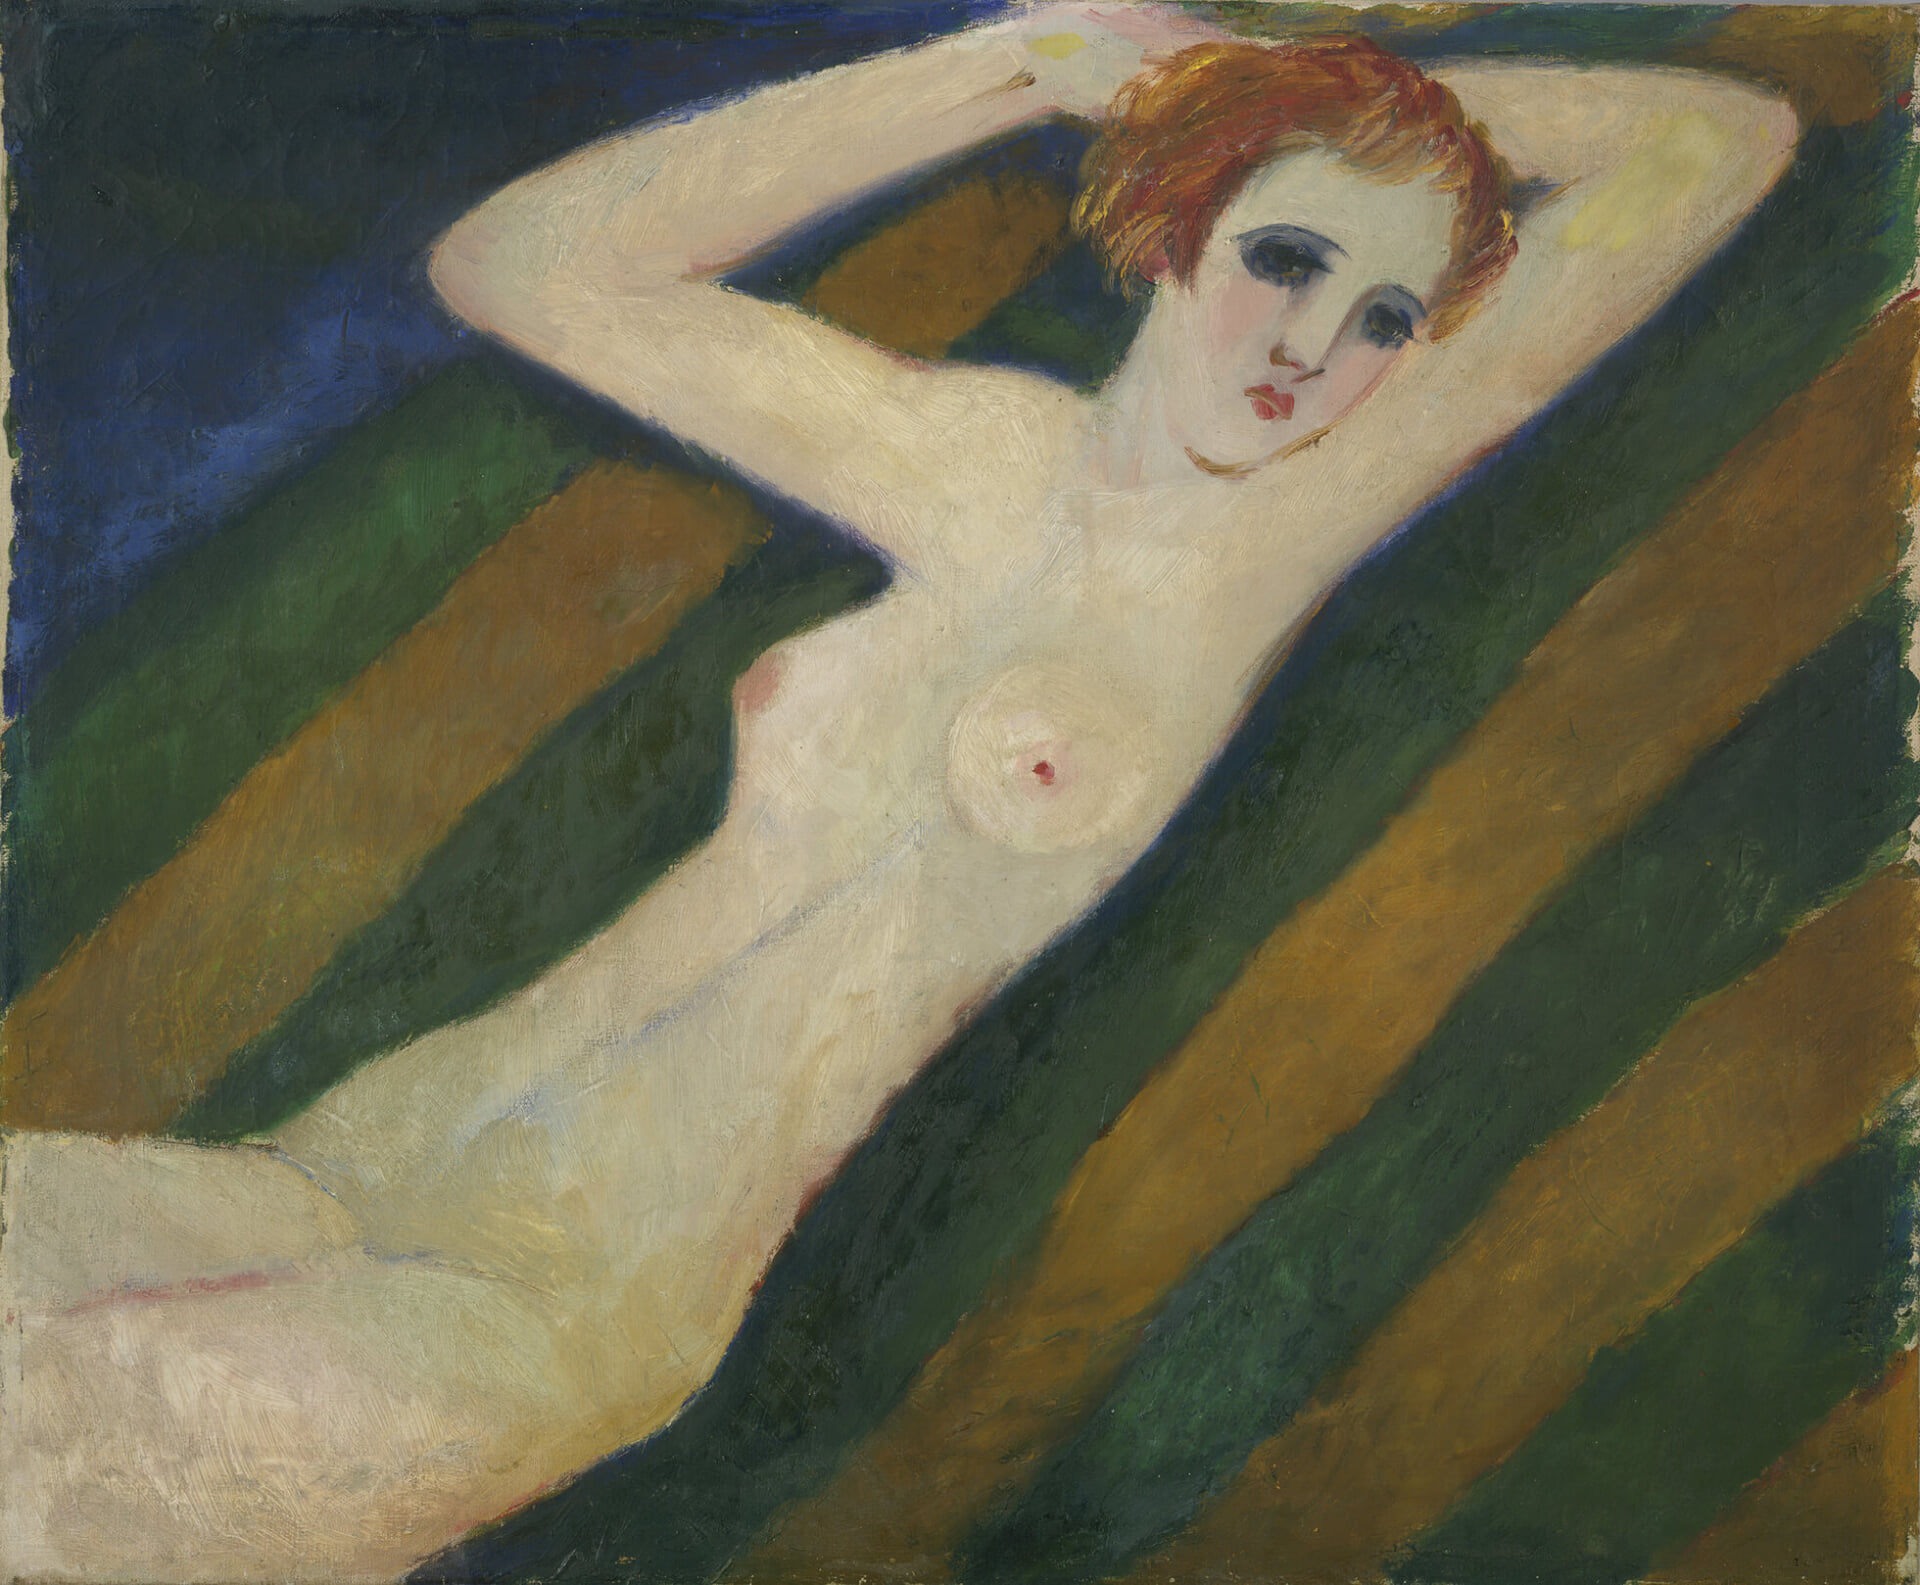 Nude on the West Coast, 1931-1932, Oil on canvas, Collection of Yumeji Art Museum